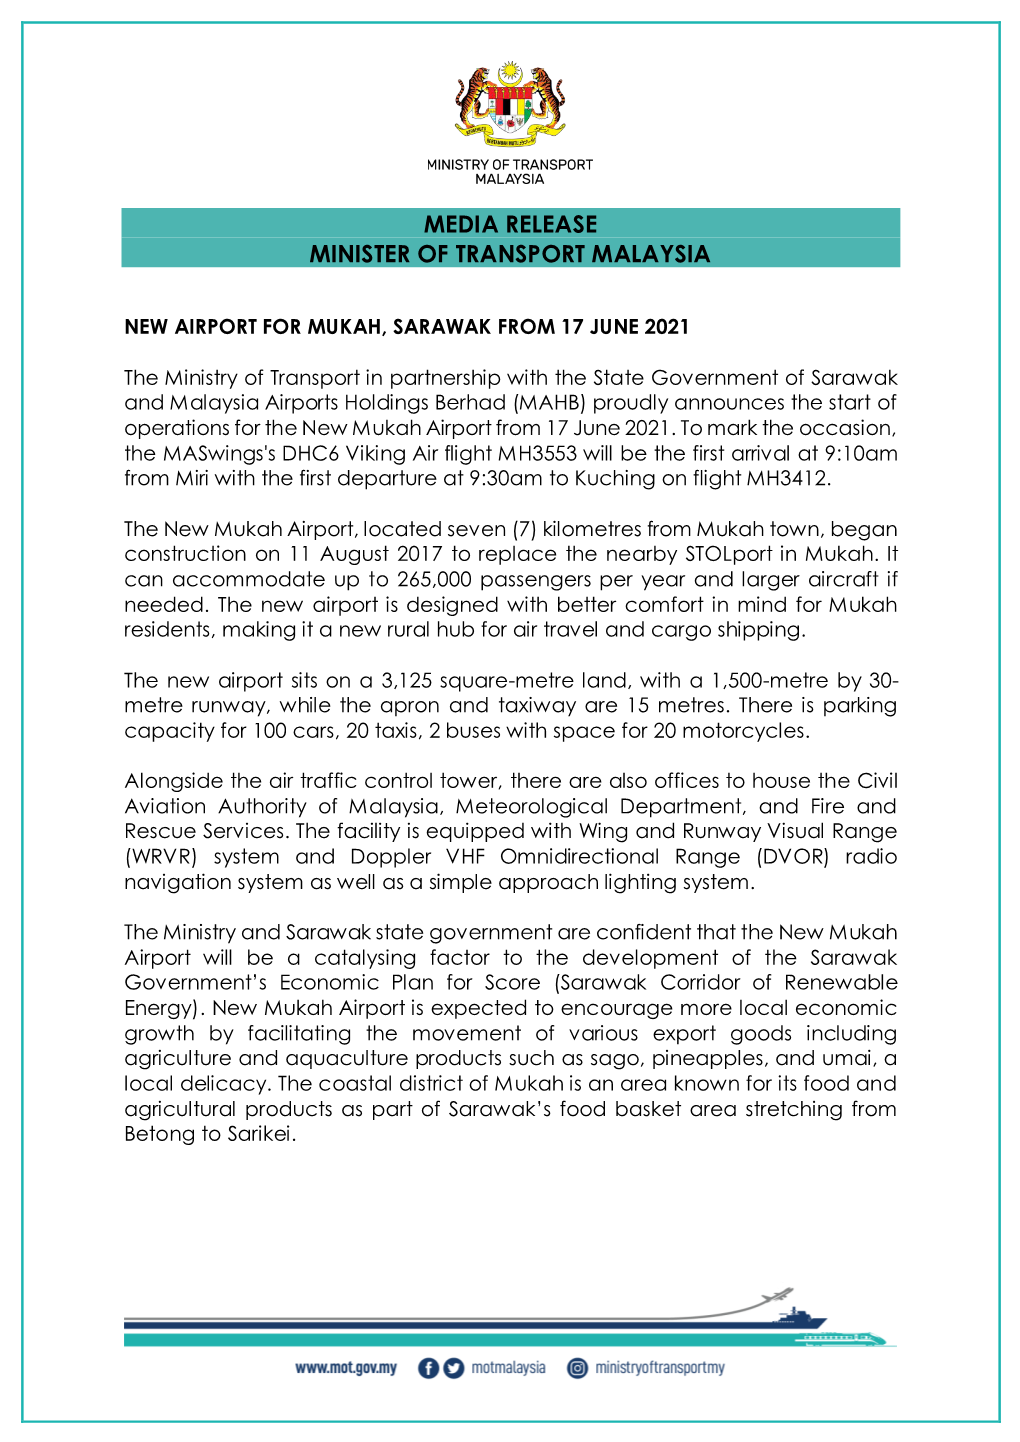 Media Release Minister of Transport Malaysia